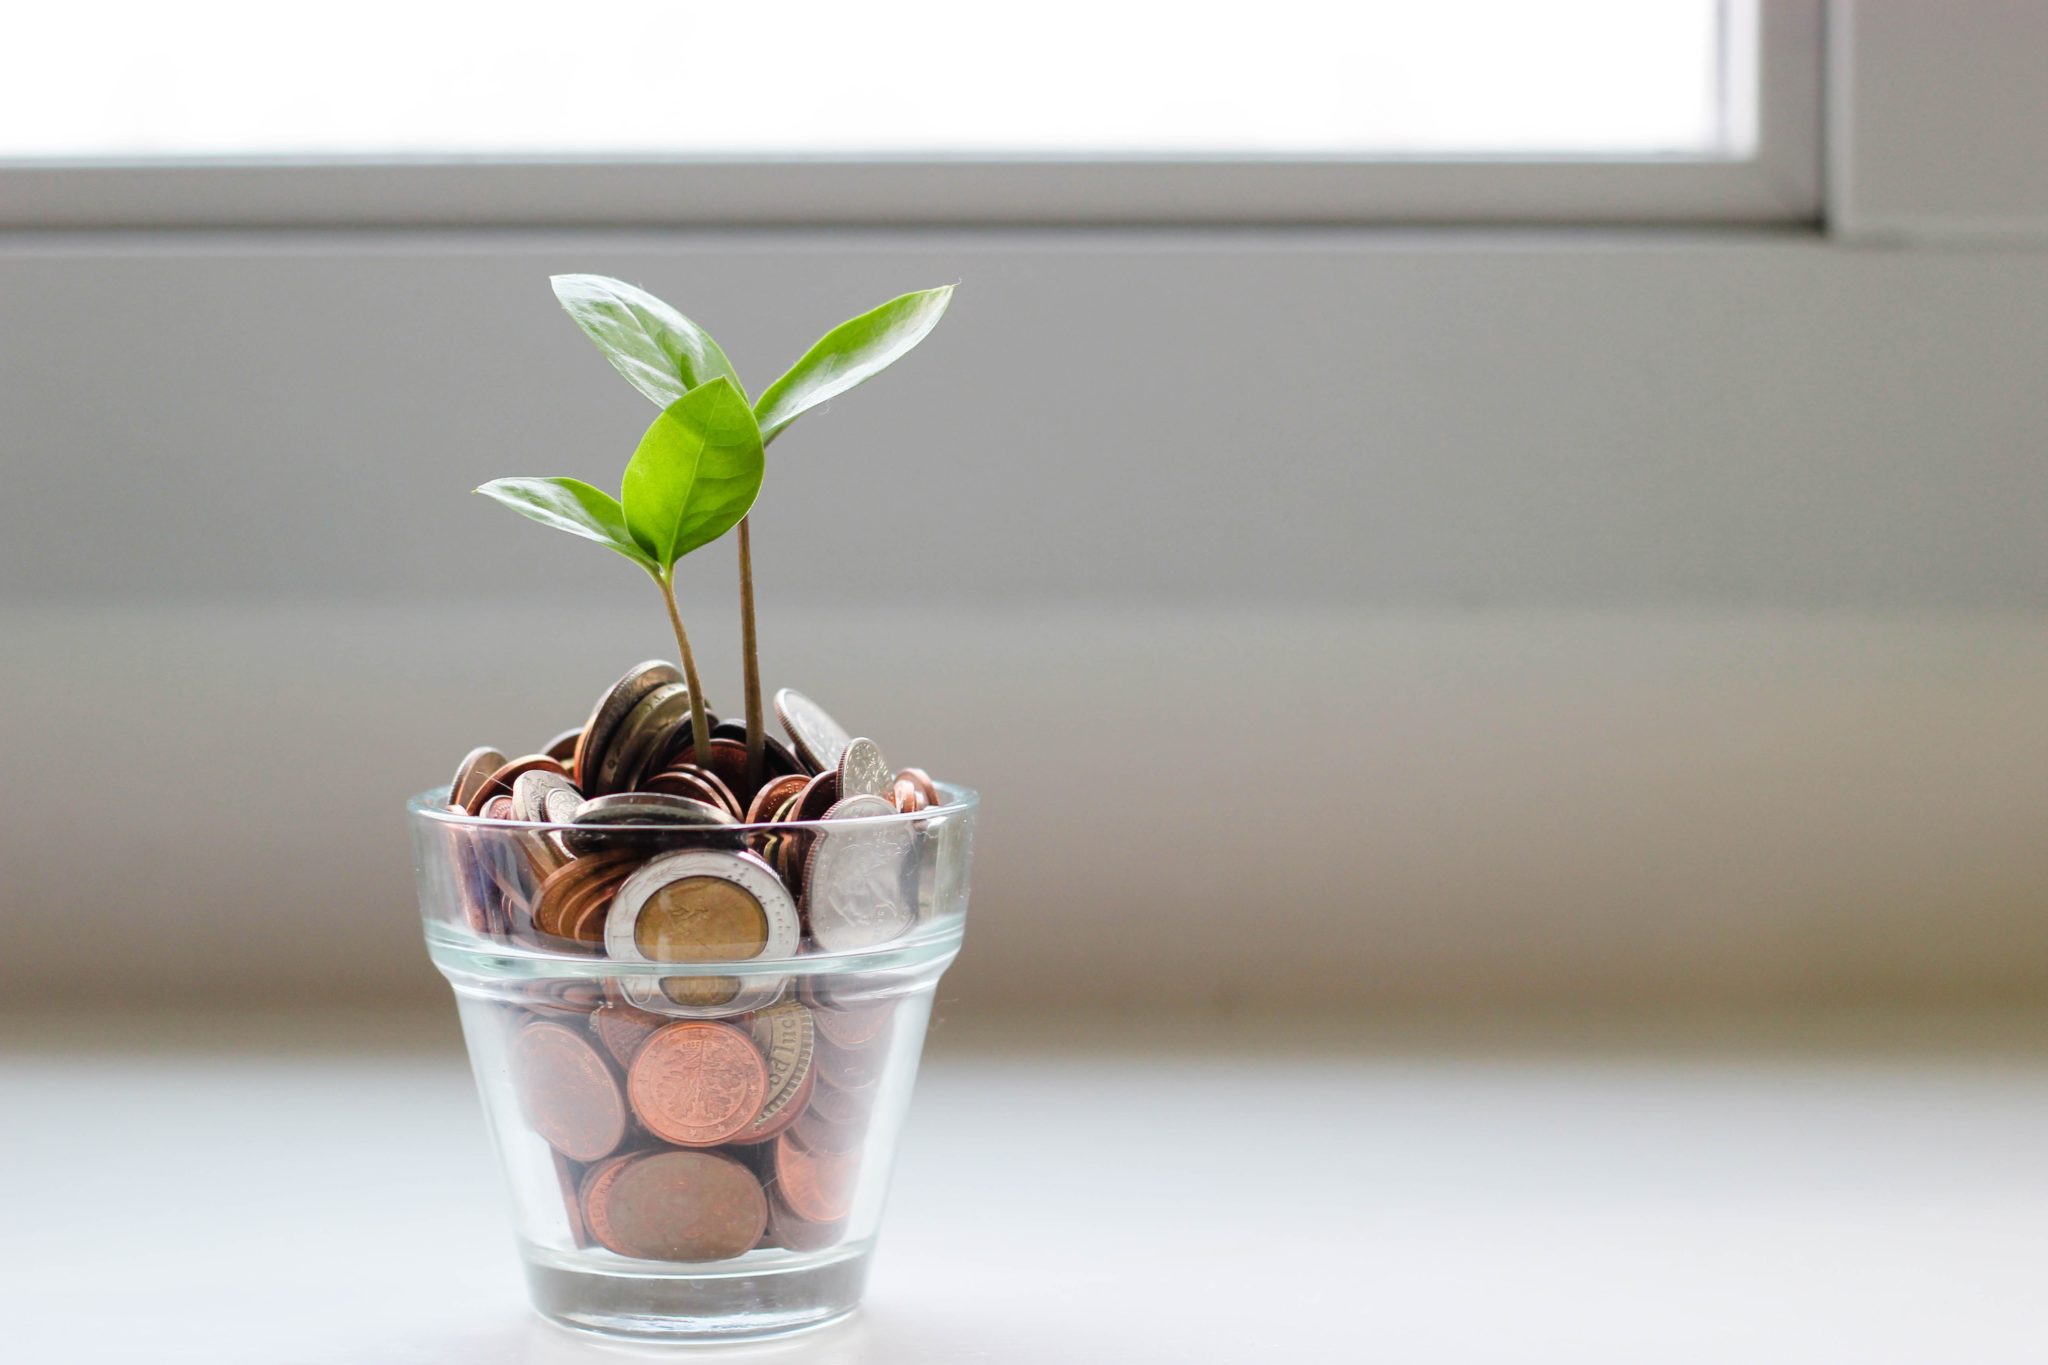 Small green plant in clear glass pot with coins.